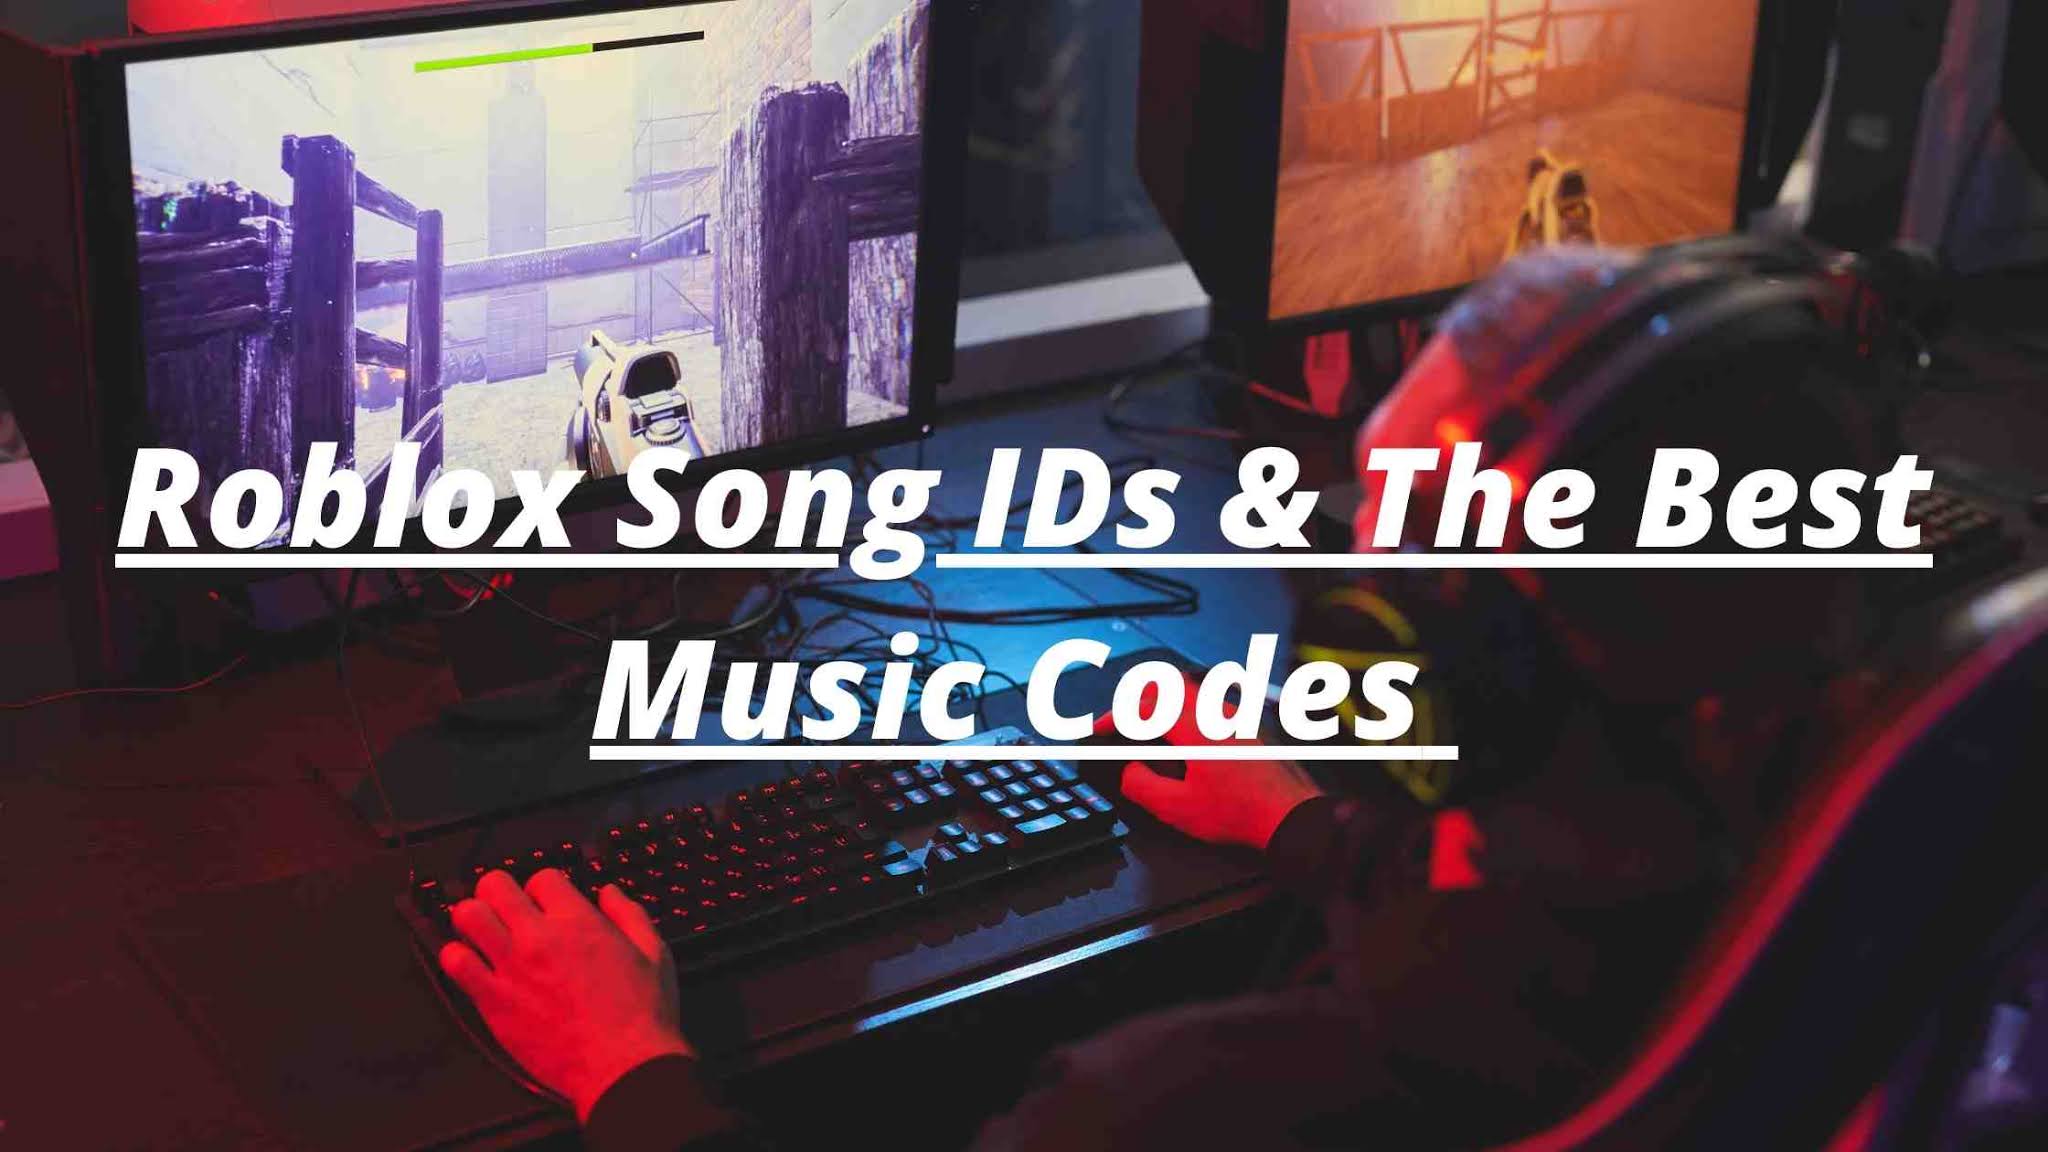 Roblox Song Ids The Best Music Codes - roblox song rids